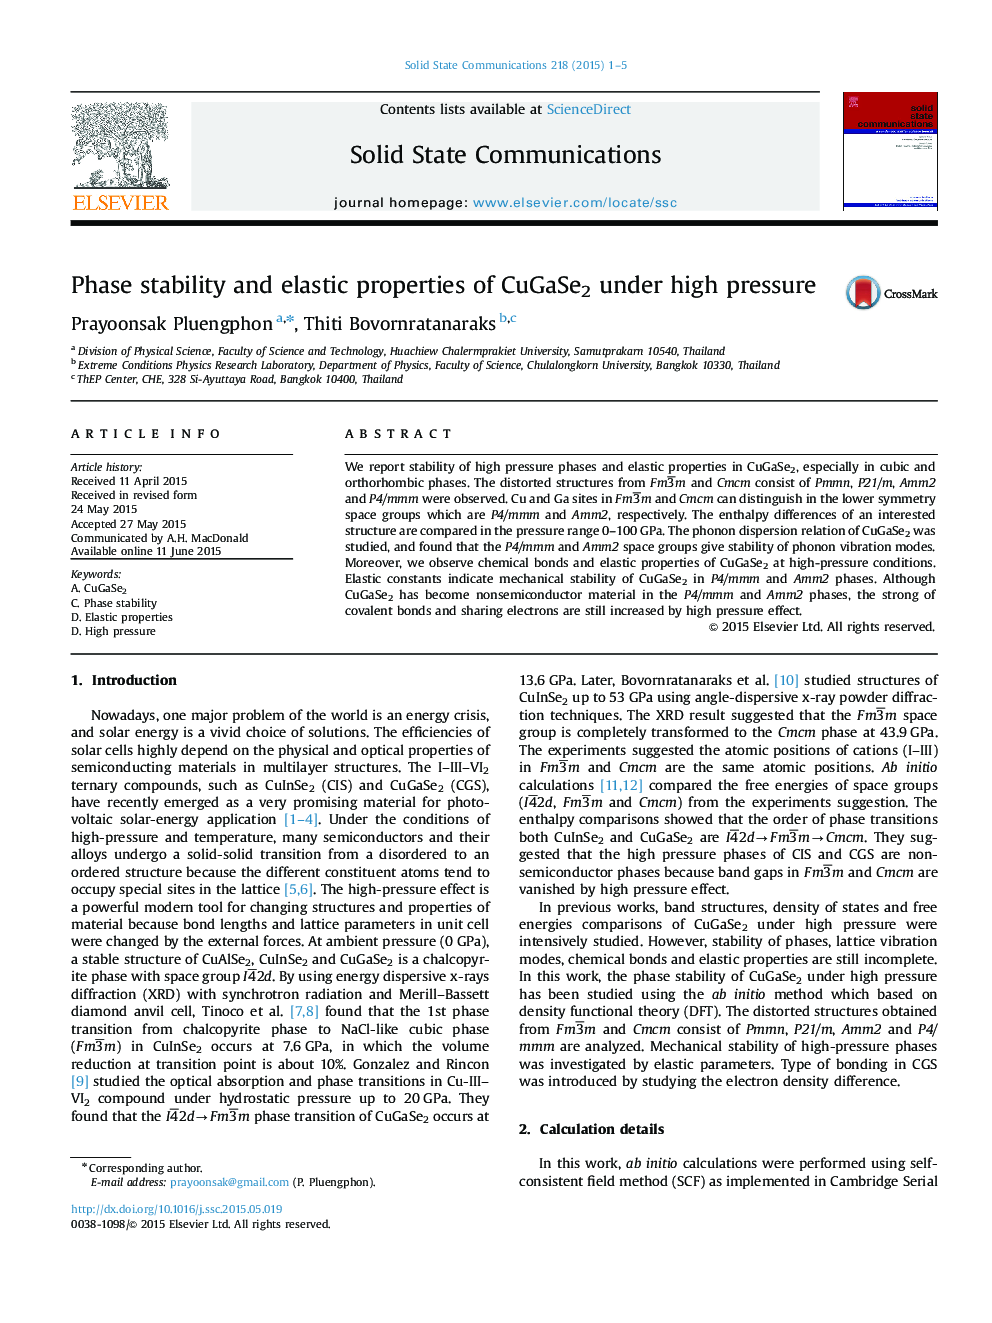 Phase stability and elastic properties of CuGaSe2 under high pressure